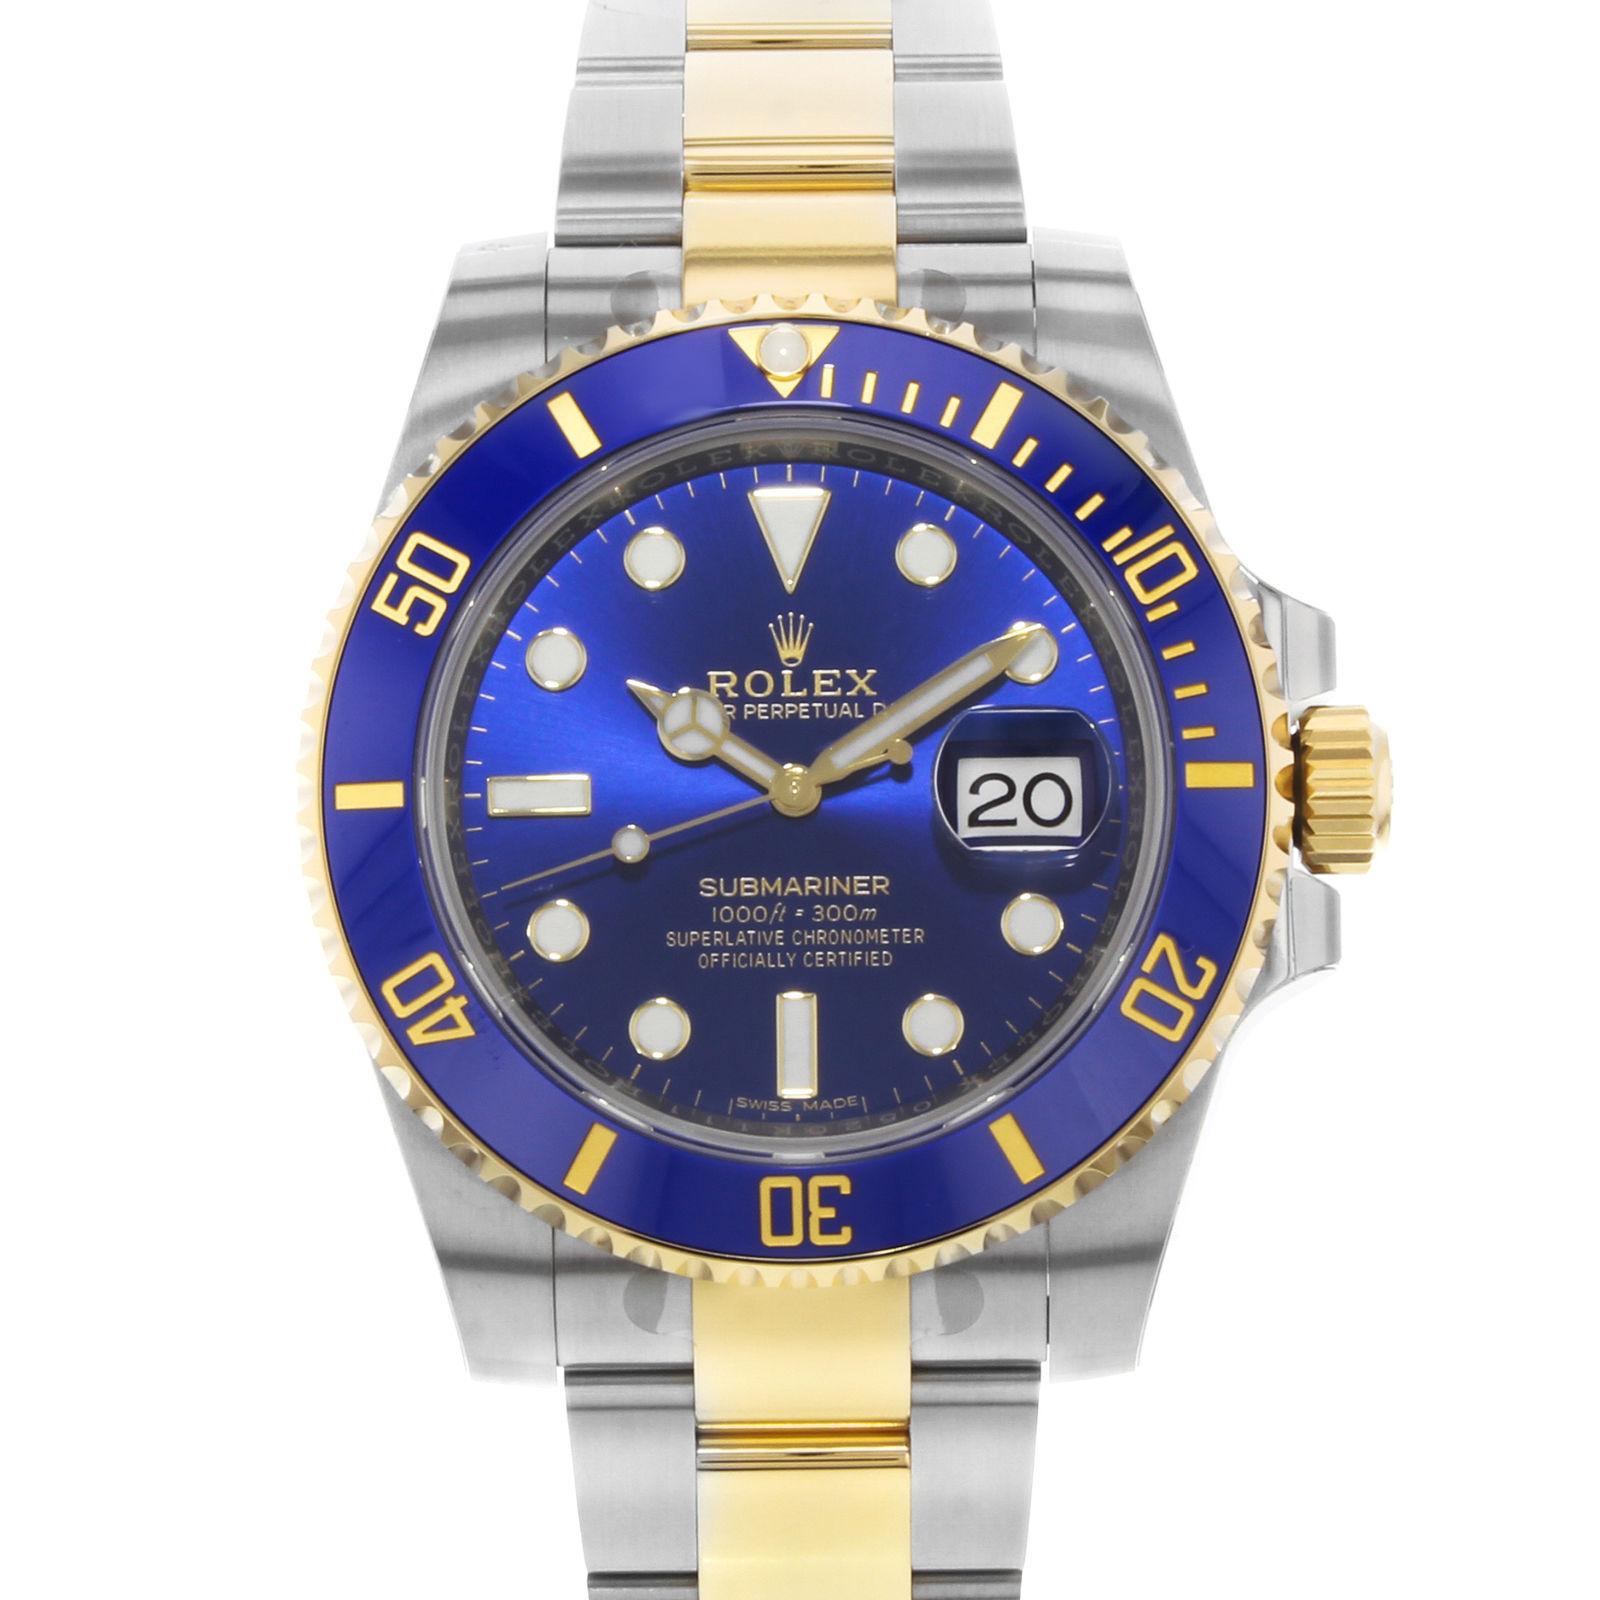 (20231
This brand new Rolex Submariner 116613LB is a beautiful men's timepiece that is powered by an automatic movement which is cased in a stainless steel case. It has a round shape face, date dial and has hand sticks & dots style markers. It is